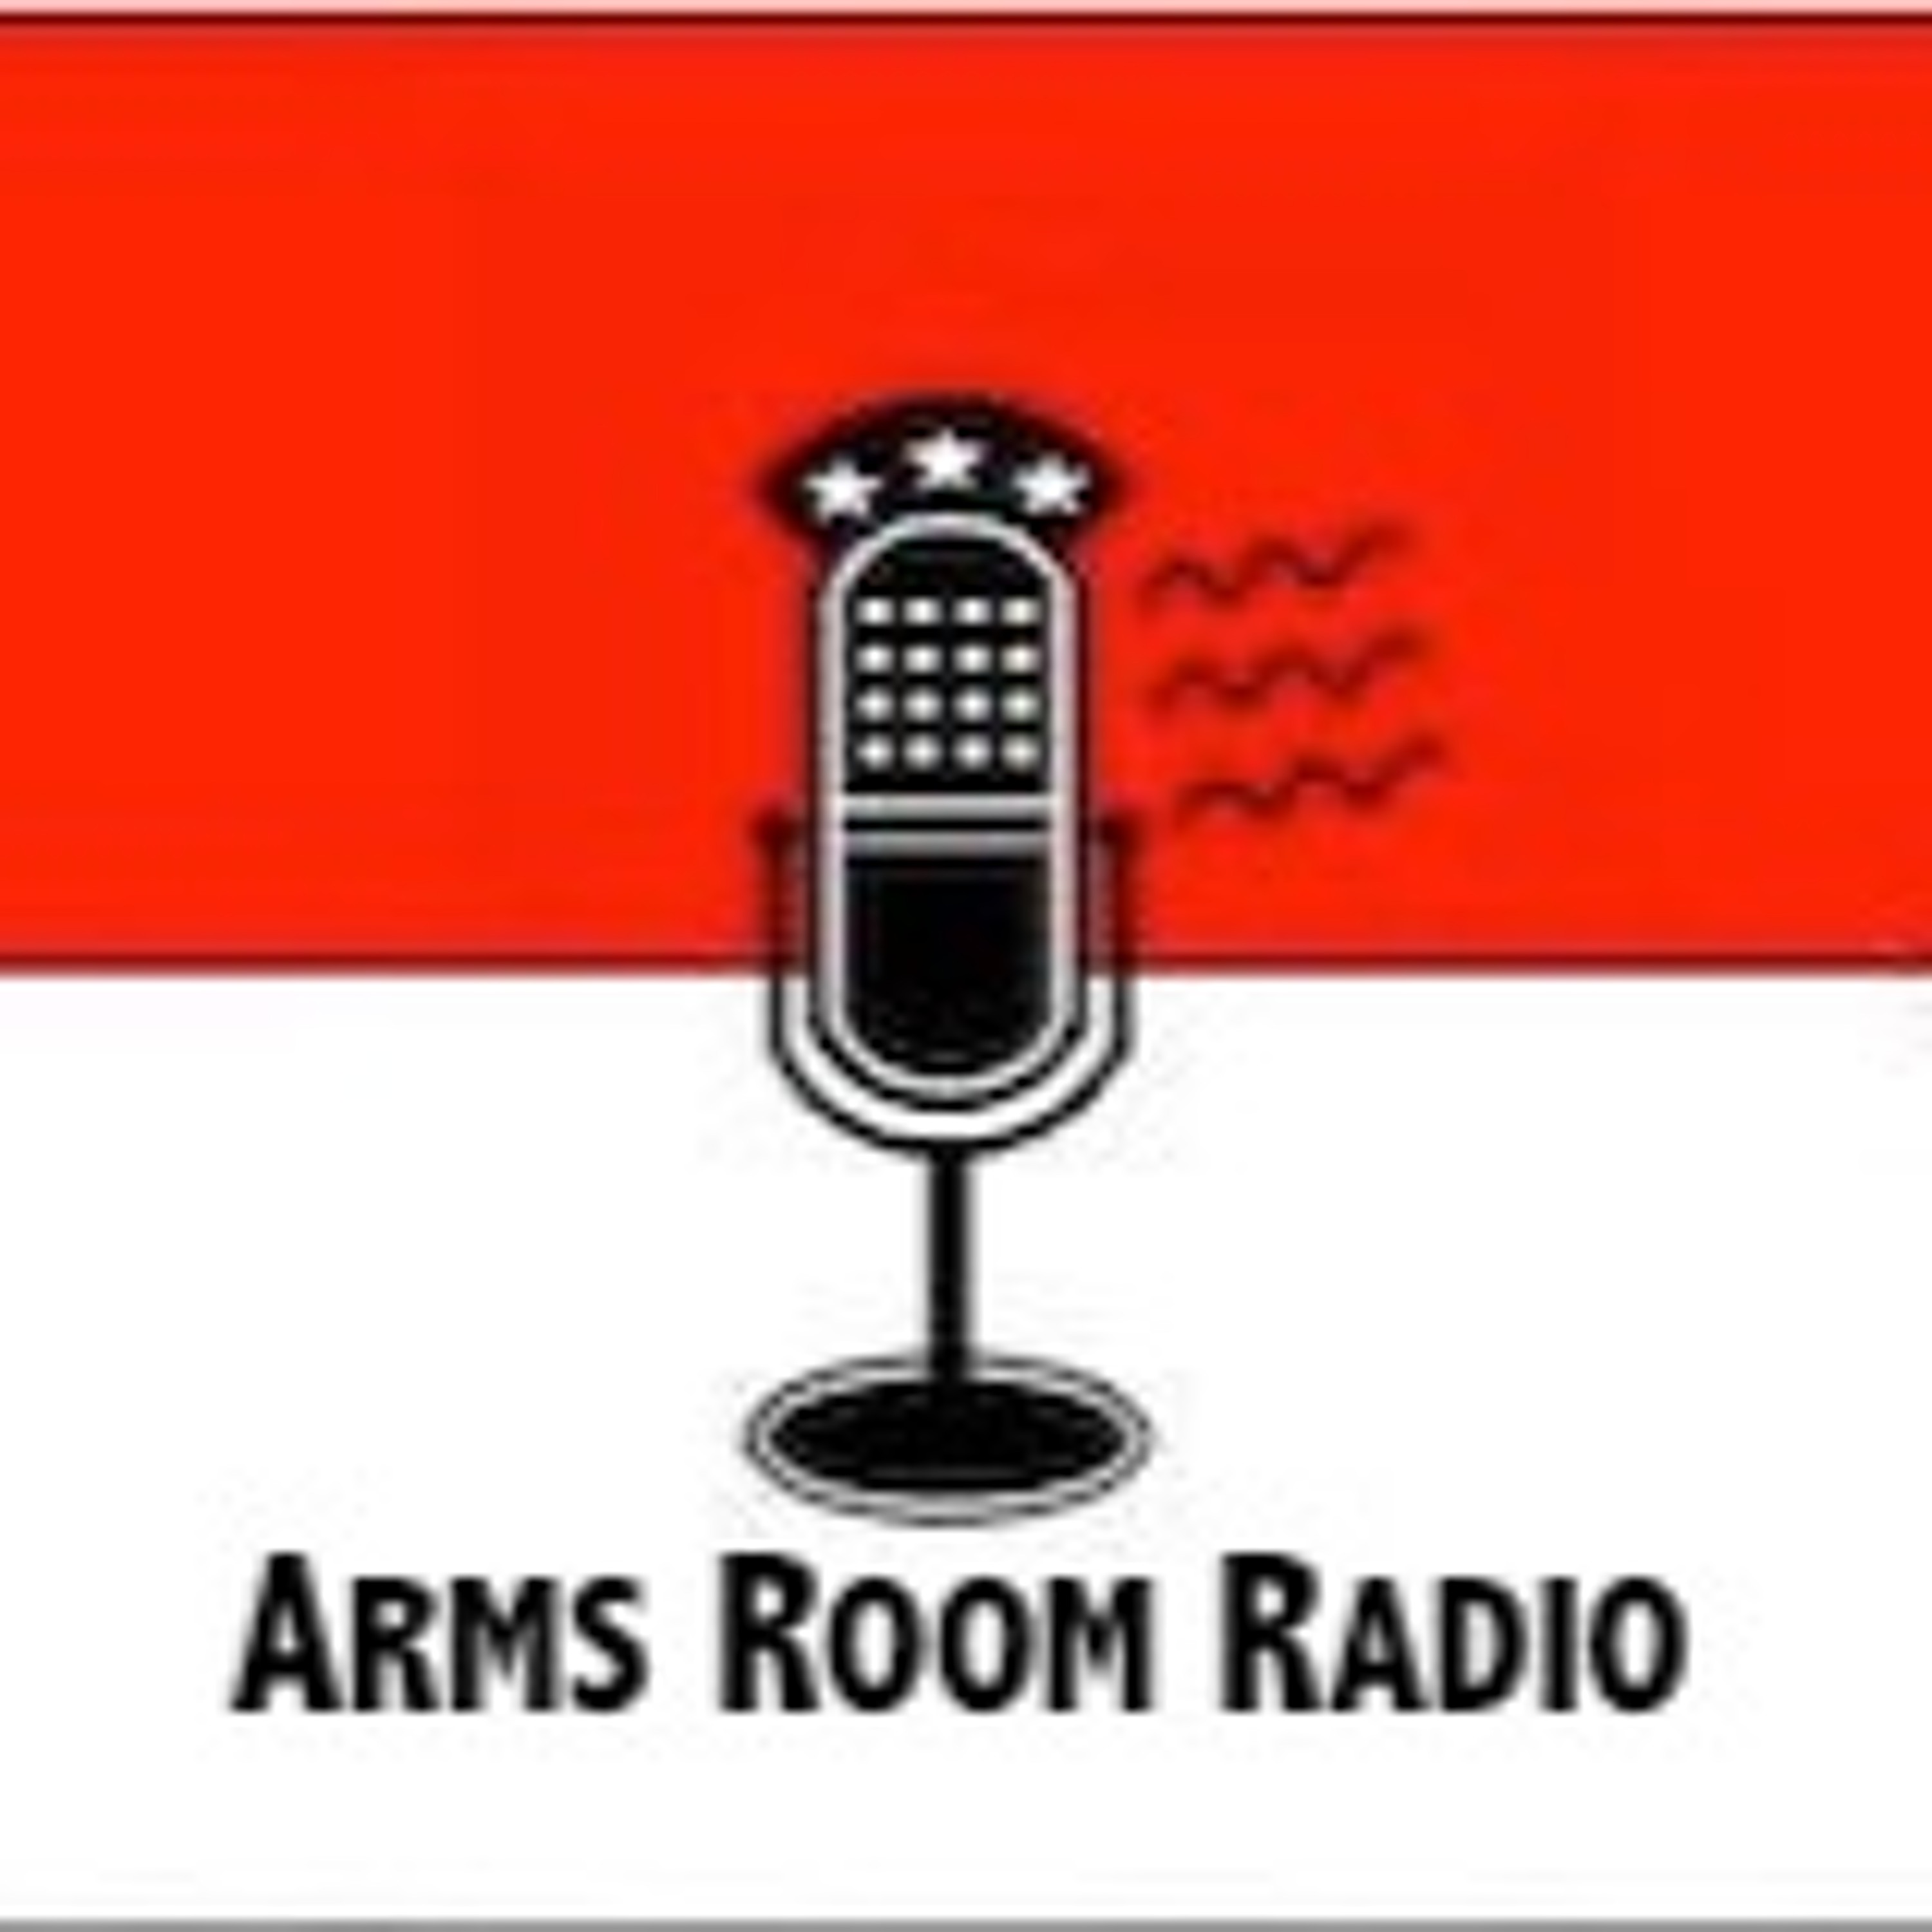 ArmsRoomRadio 06.26.21 Louisiana Constitutional Carry and Lost Tires